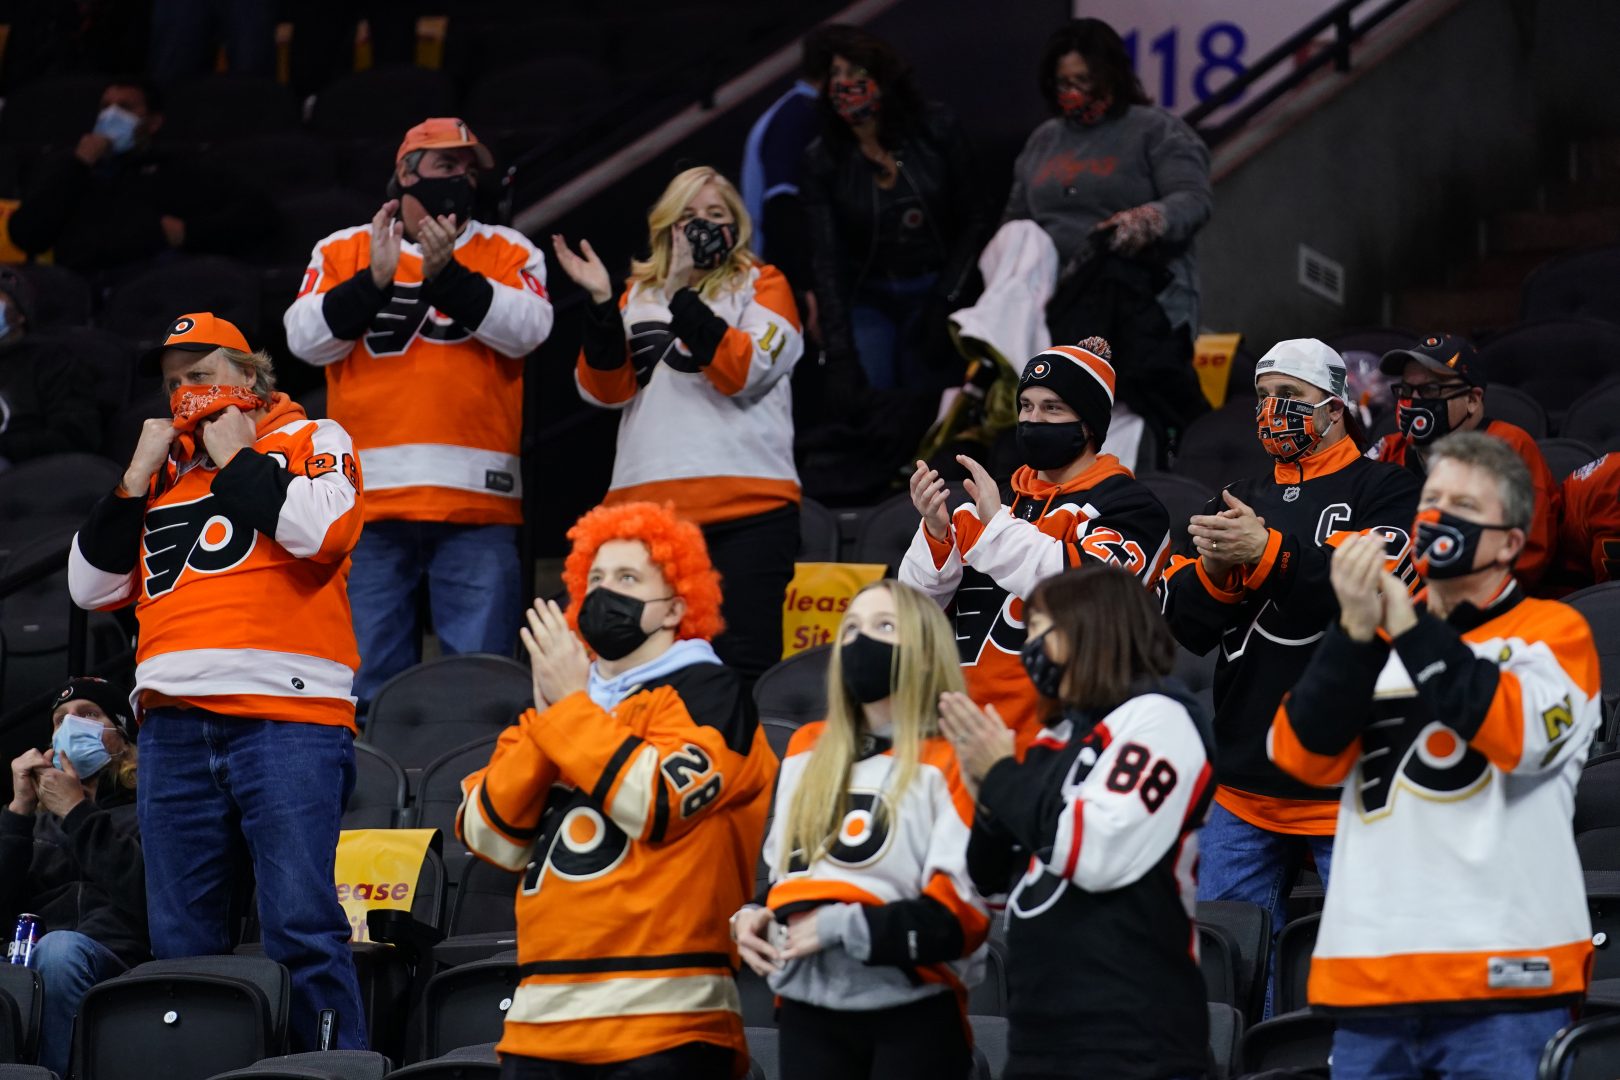 Flyers fans can return to Wells Fargo Center for next home game